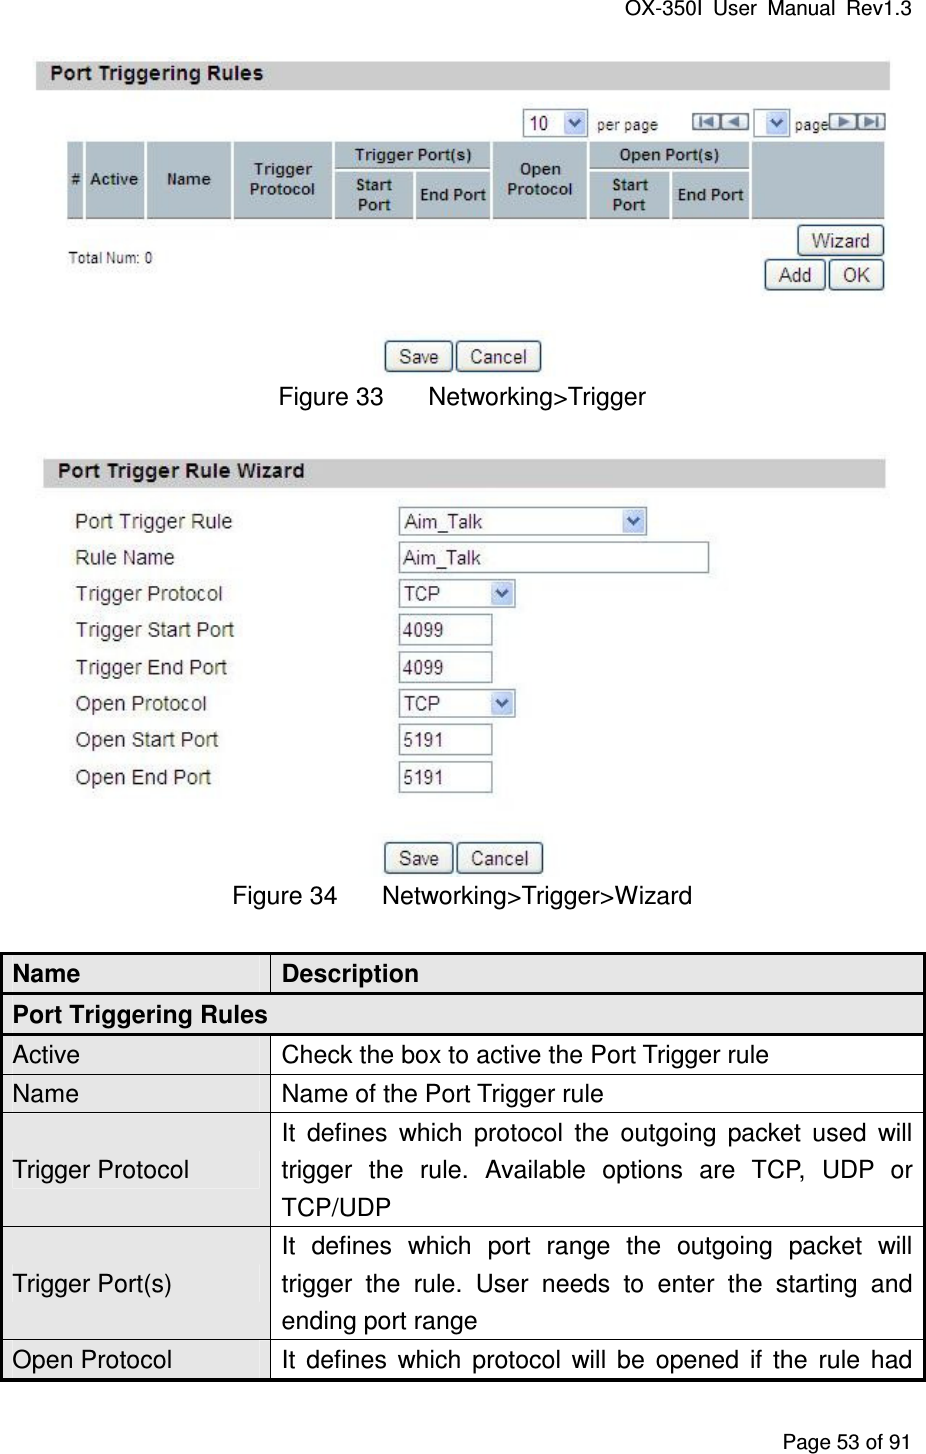 OX-350I  User  Manual  Rev1.3 Page 53 of 91  Figure 33  Networking&gt;Trigger  Figure 34  Networking&gt;Trigger&gt;Wizard Name  Description Port Triggering Rules Active  Check the box to active the Port Trigger rule Name  Name of the Port Trigger rule Trigger Protocol It  defines  which  protocol  the  outgoing  packet  used  will trigger  the  rule.  Available  options  are  TCP,  UDP  or TCP/UDP Trigger Port(s) It  defines  which  port  range  the  outgoing  packet  will trigger  the  rule.  User  needs  to  enter  the  starting  and ending port range Open Protocol  It  defines  which  protocol  will  be  opened  if  the  rule  had 